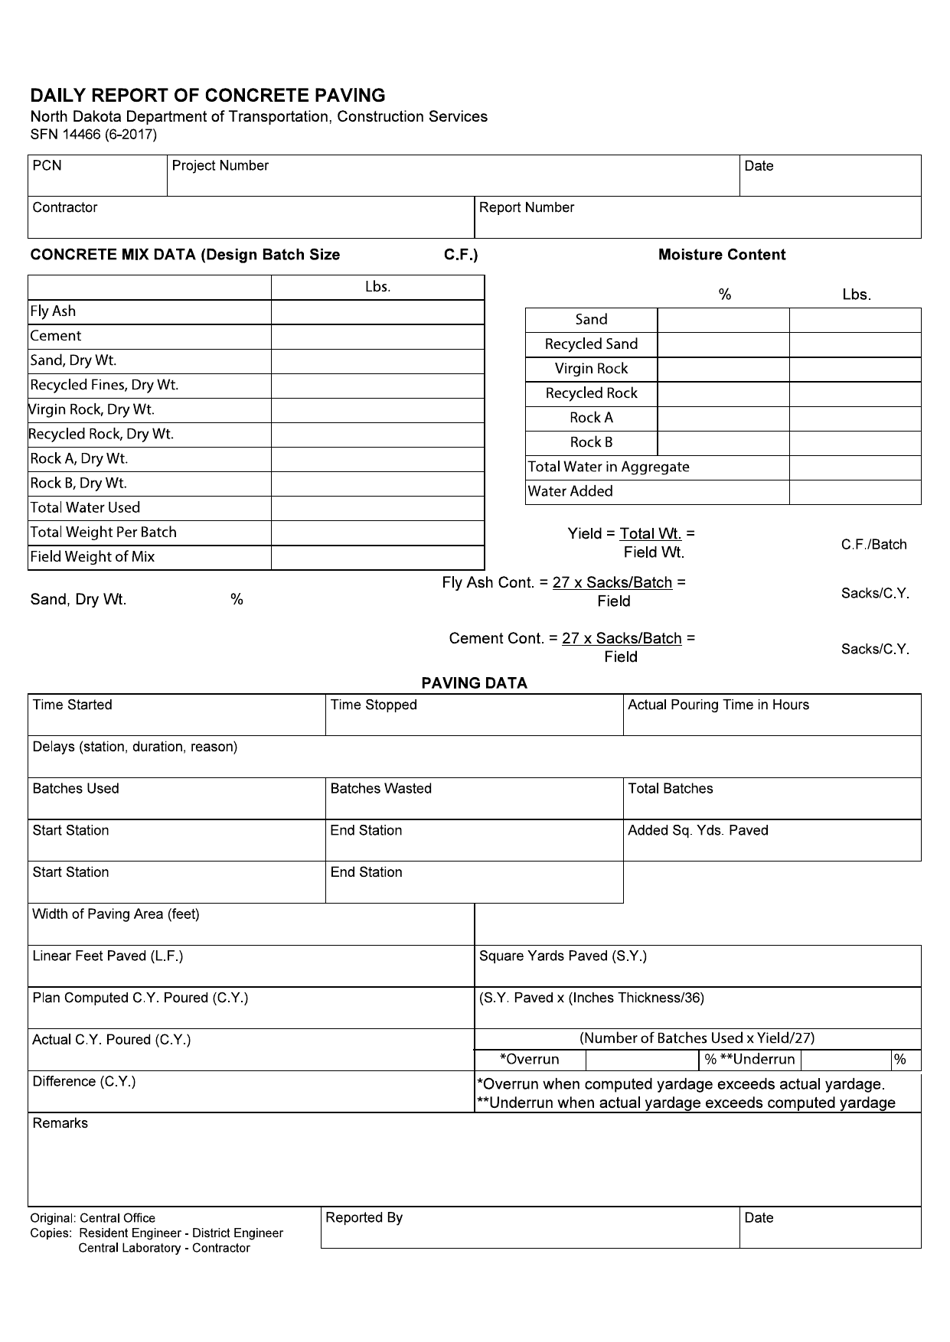 Form SFN14466 Daily Report of Concrete Paving - North Dakota, Page 1